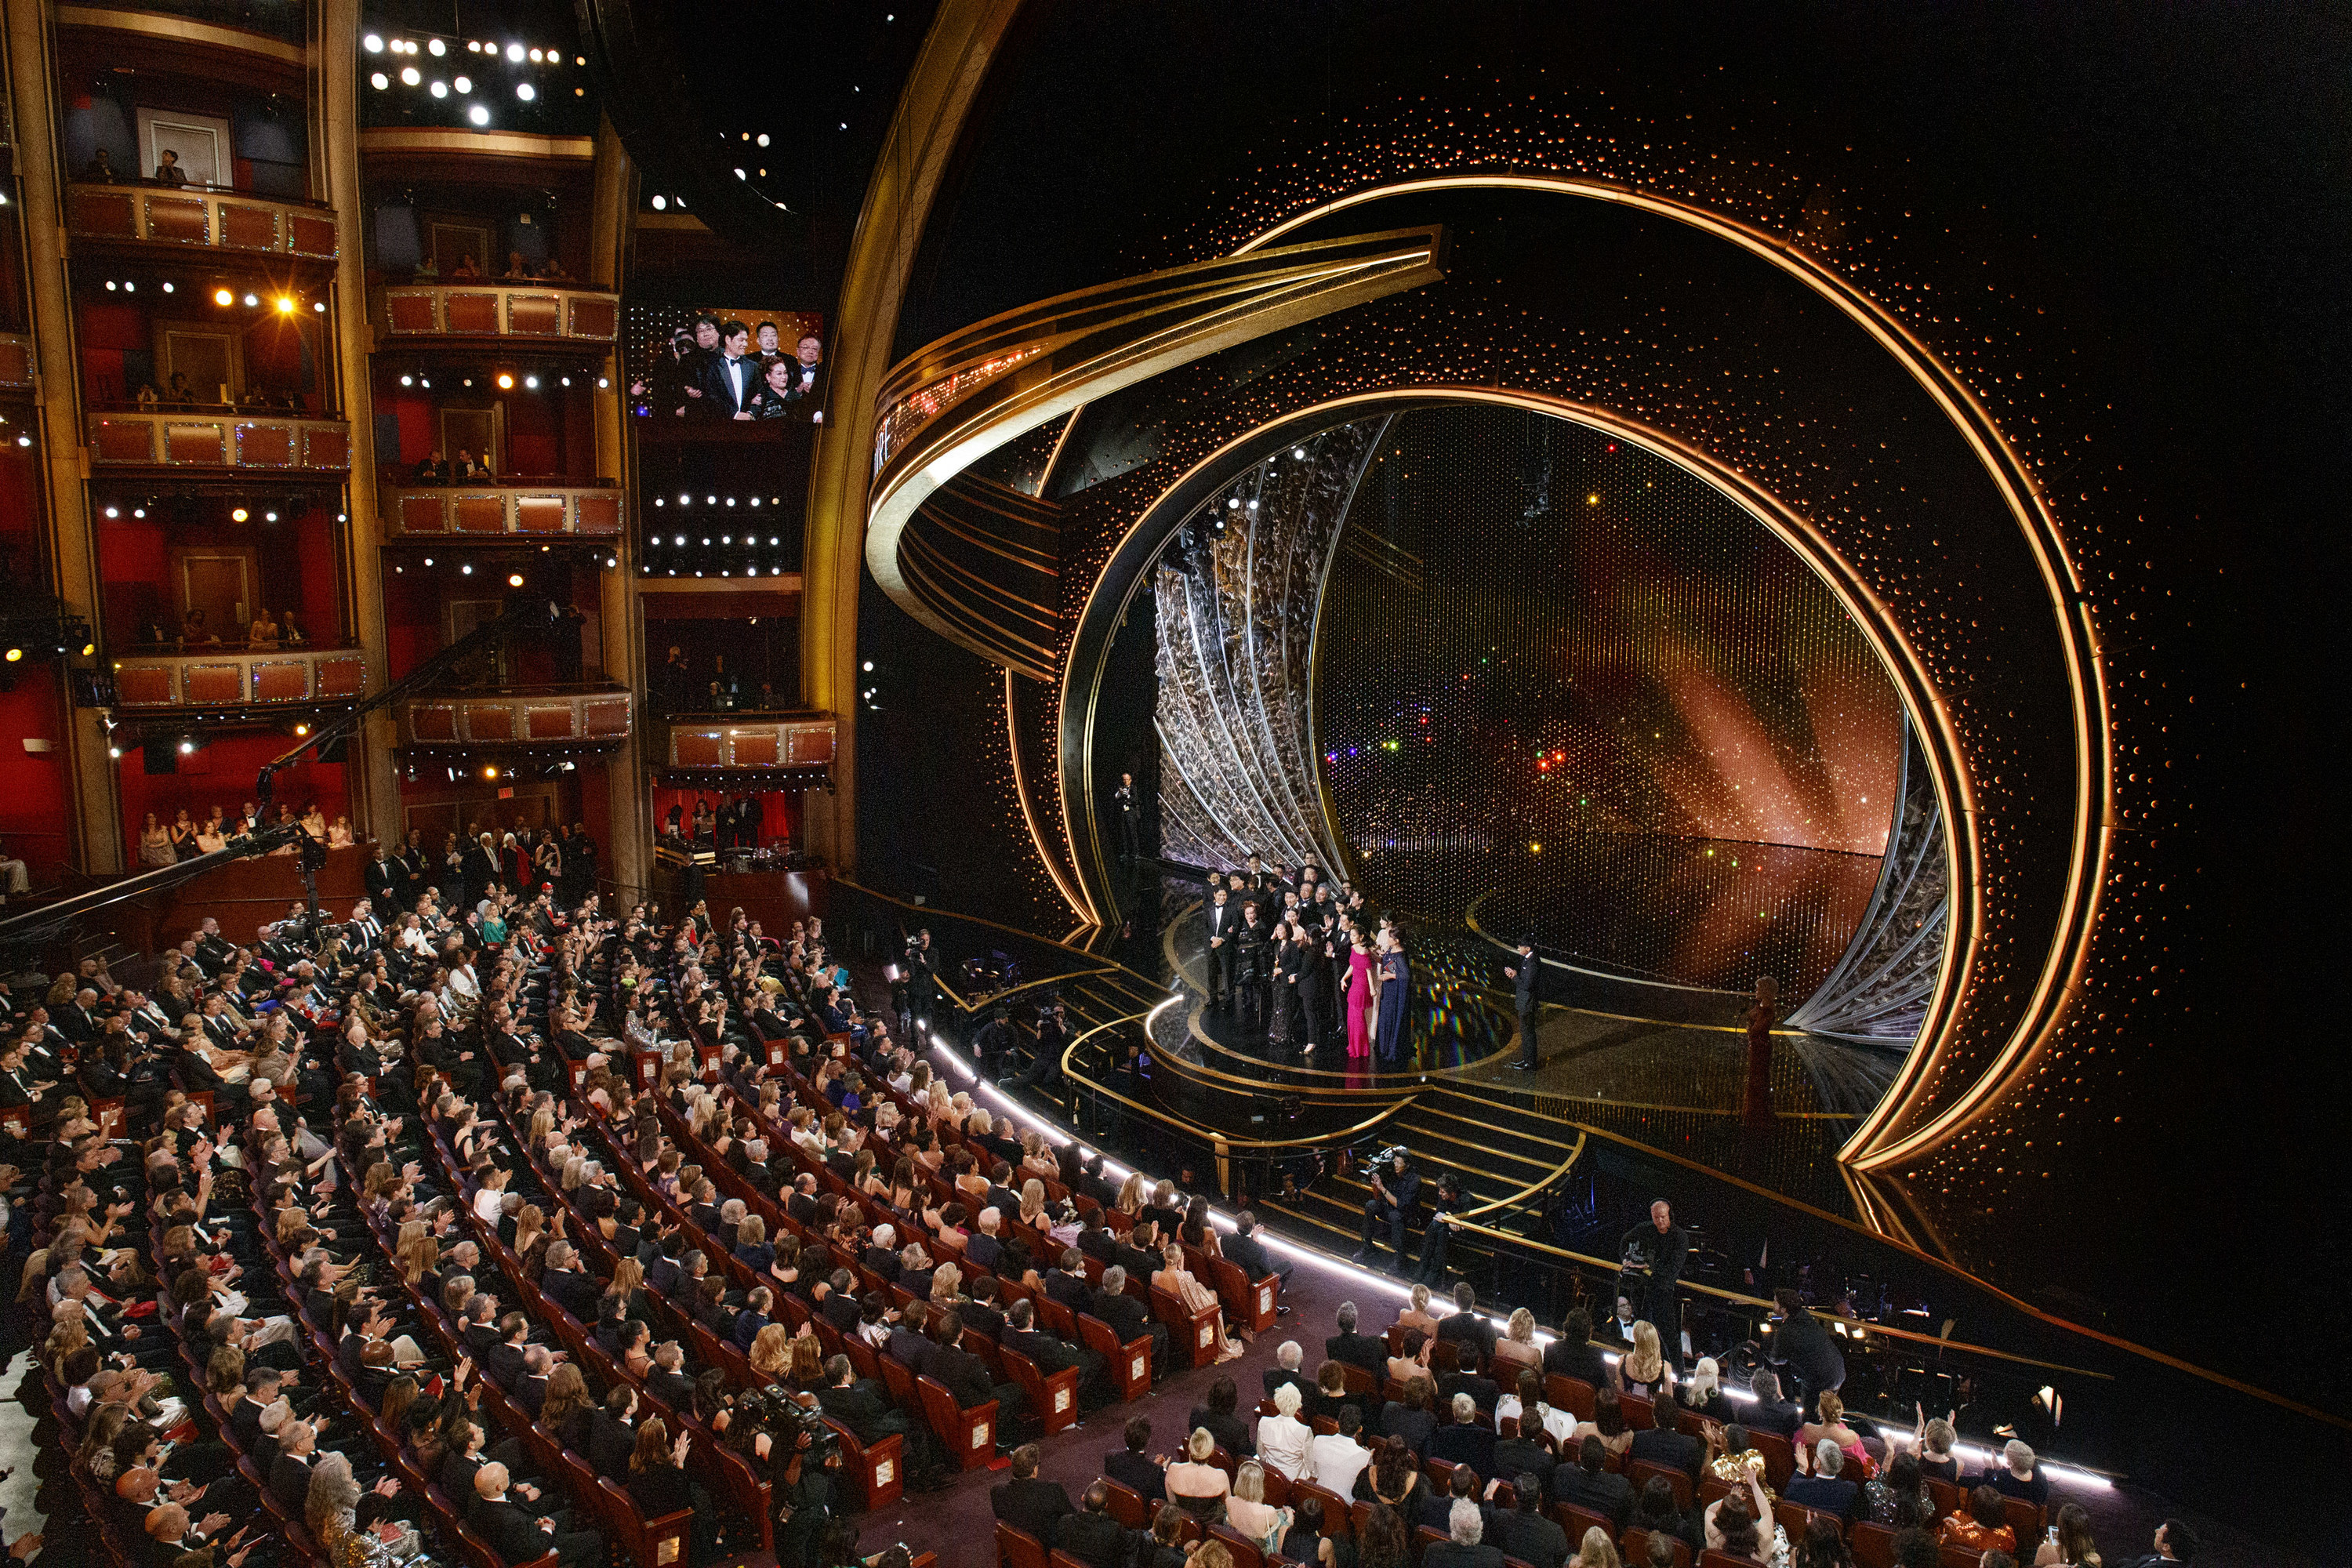 Coronavirus: Oscars 2021 postponed by two months due to COVID-19 disruption, Ents & Arts News